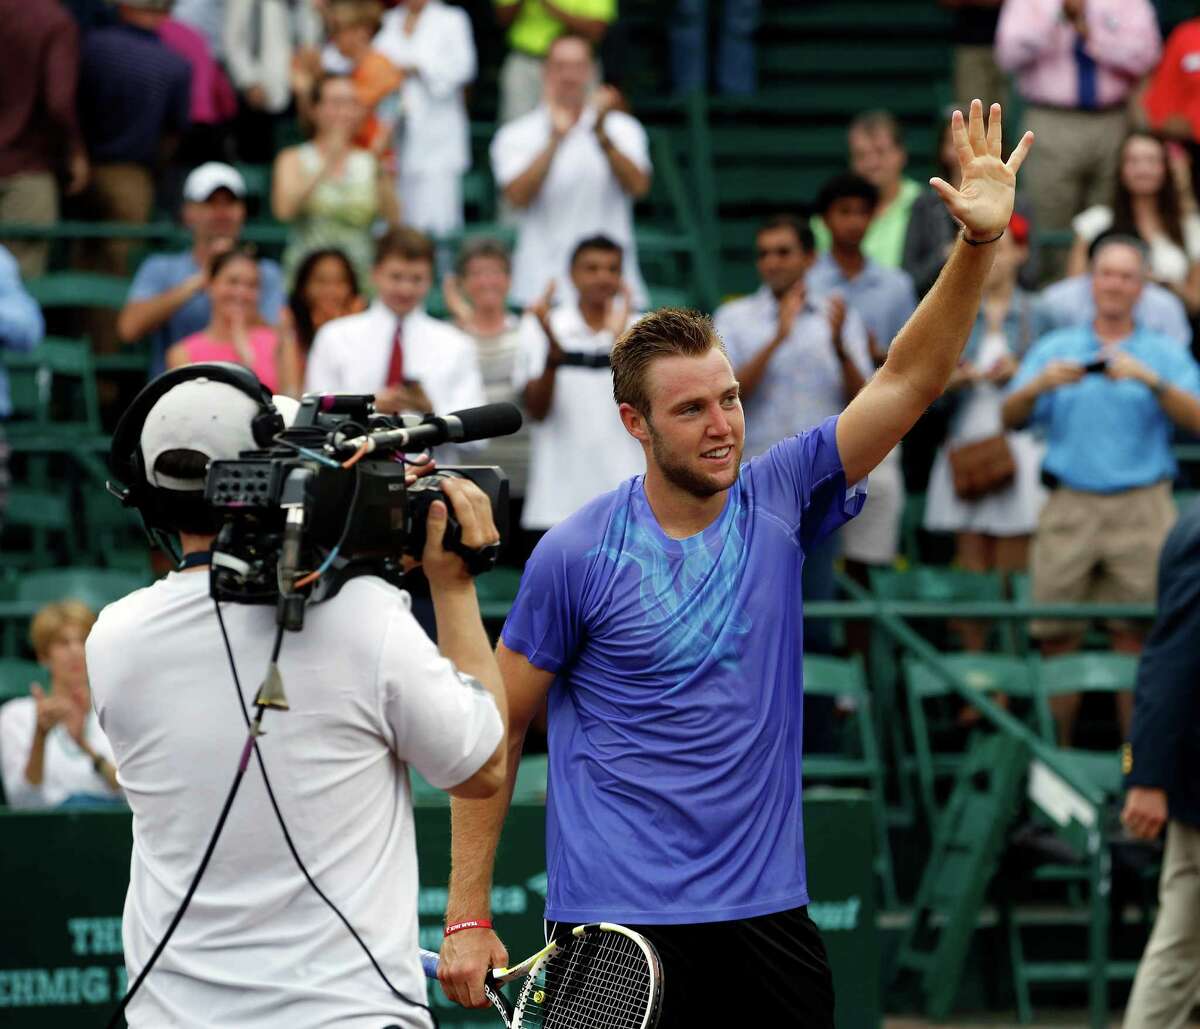 Jack Sock welcomes Sunday's win after dealing with injury and illness this past year.